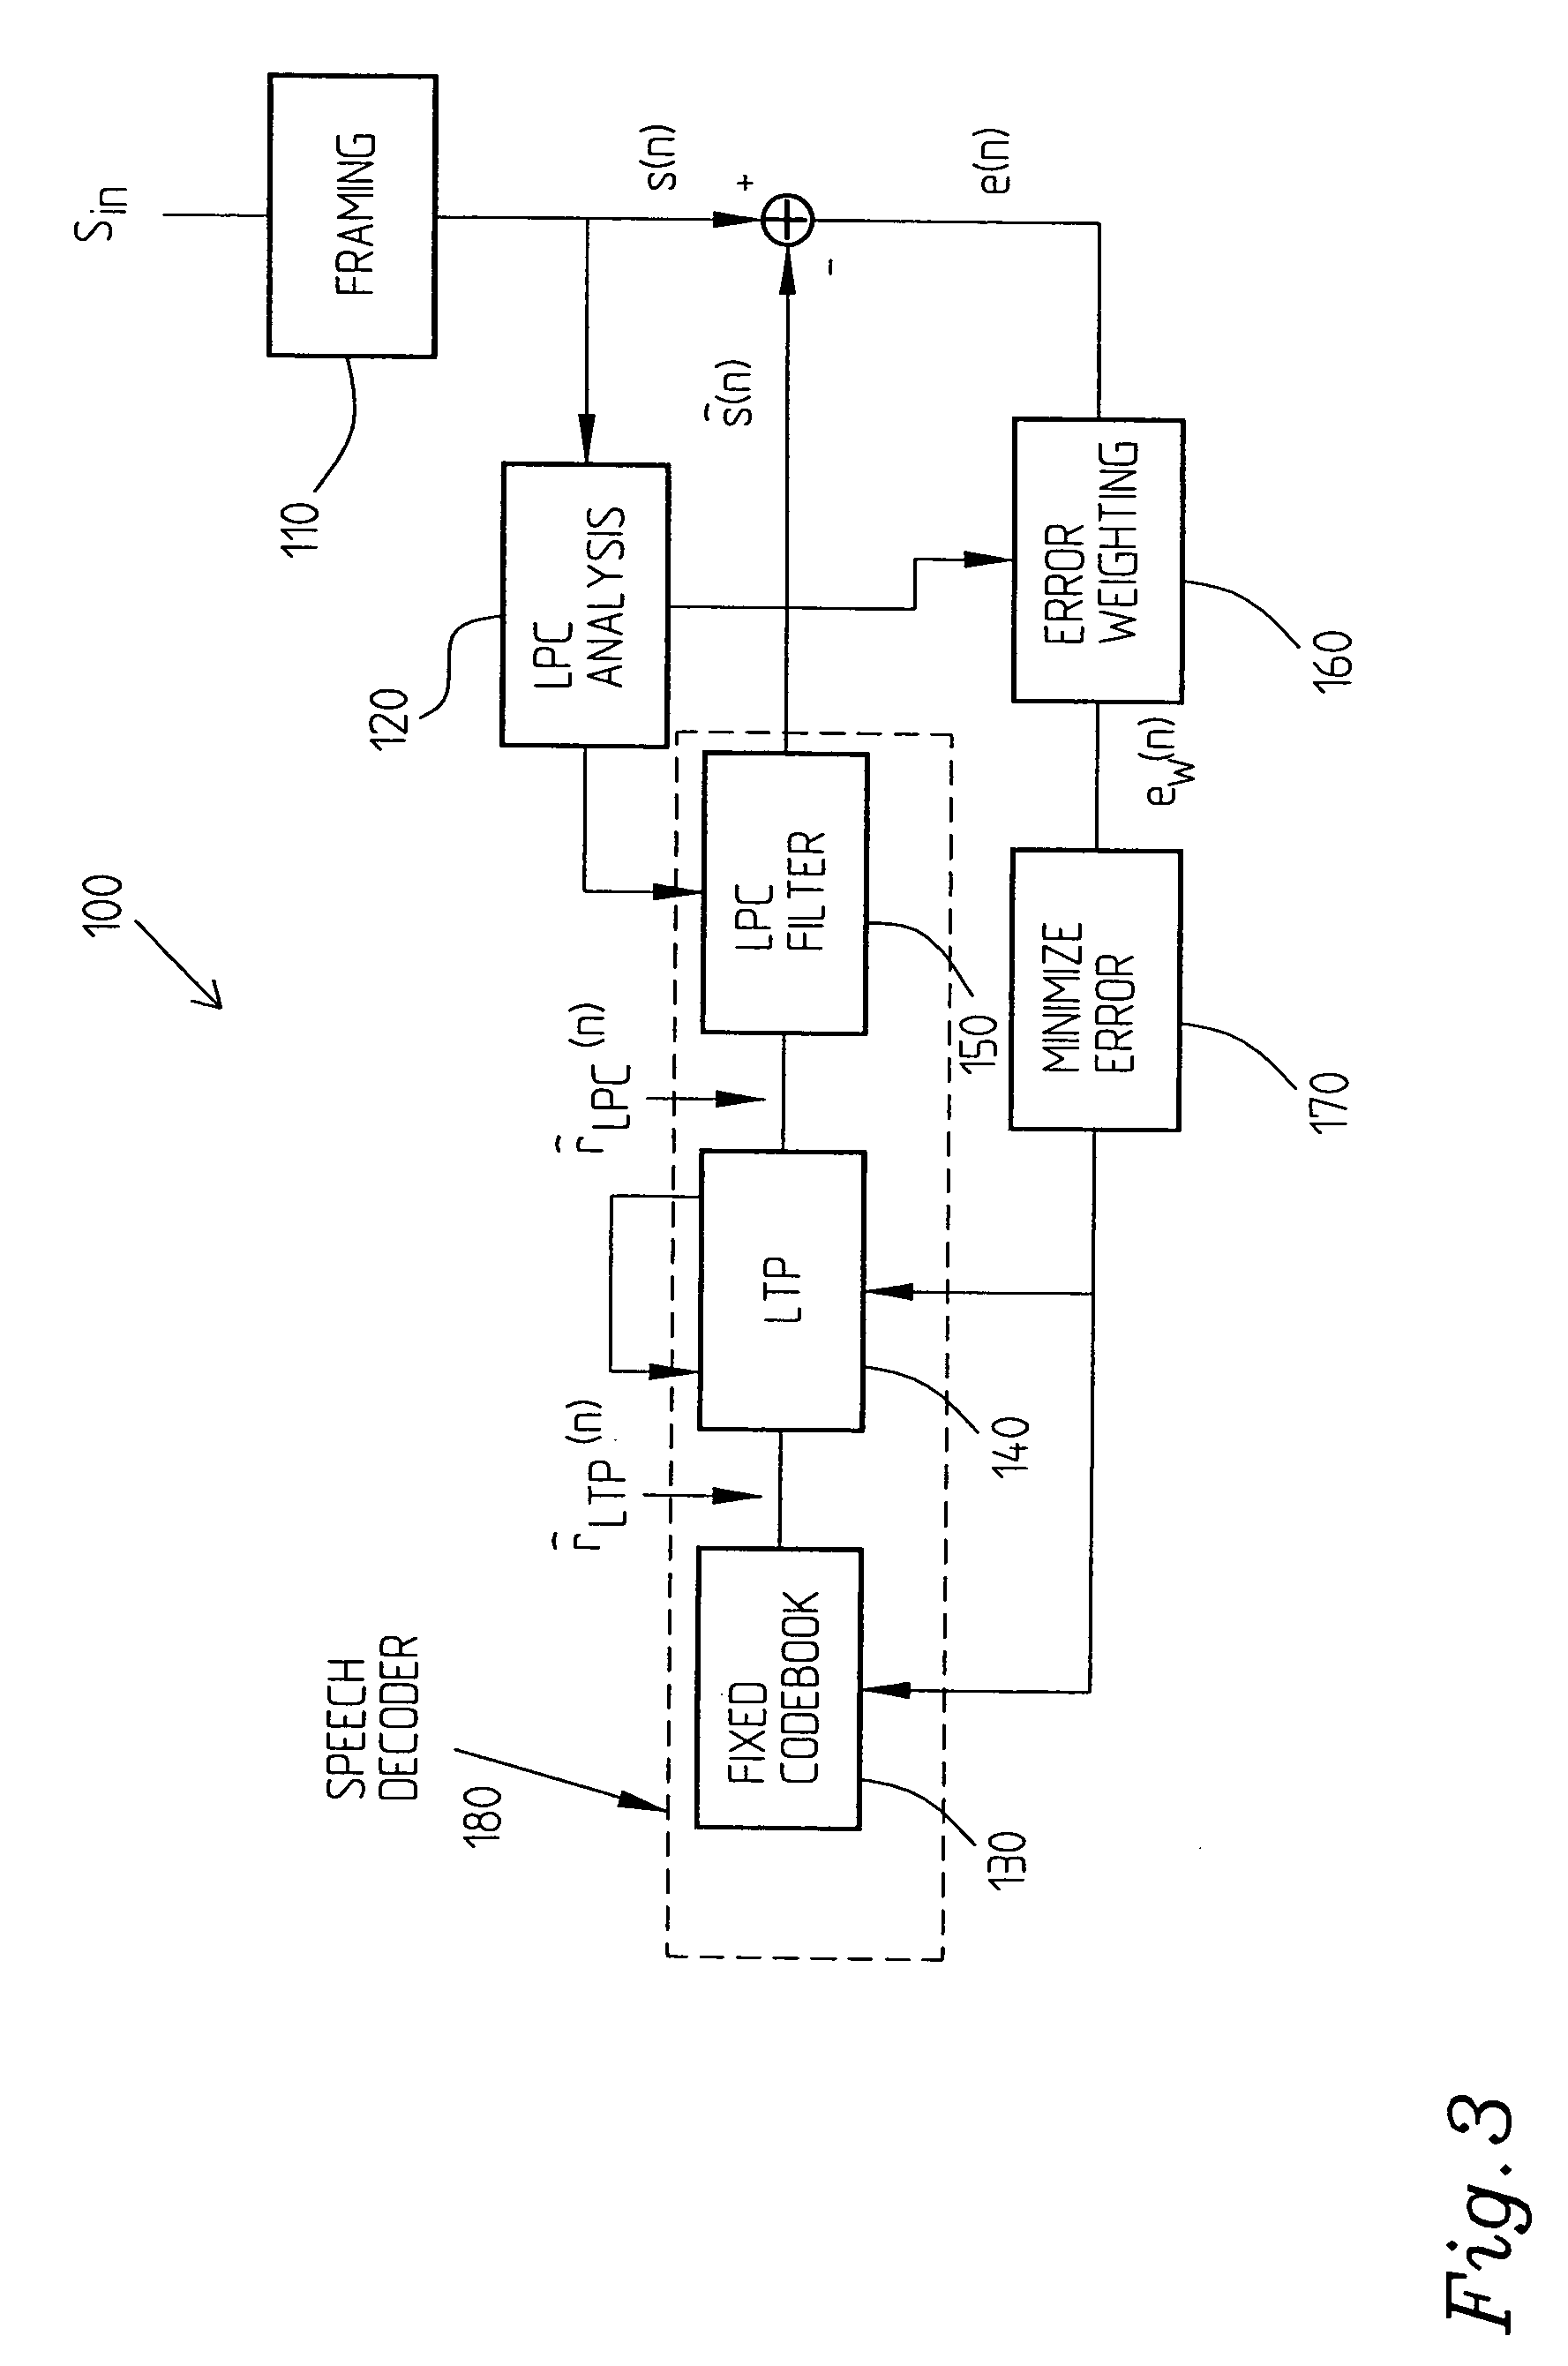 System for handling variations in the reception of a speech signal consisting of packets